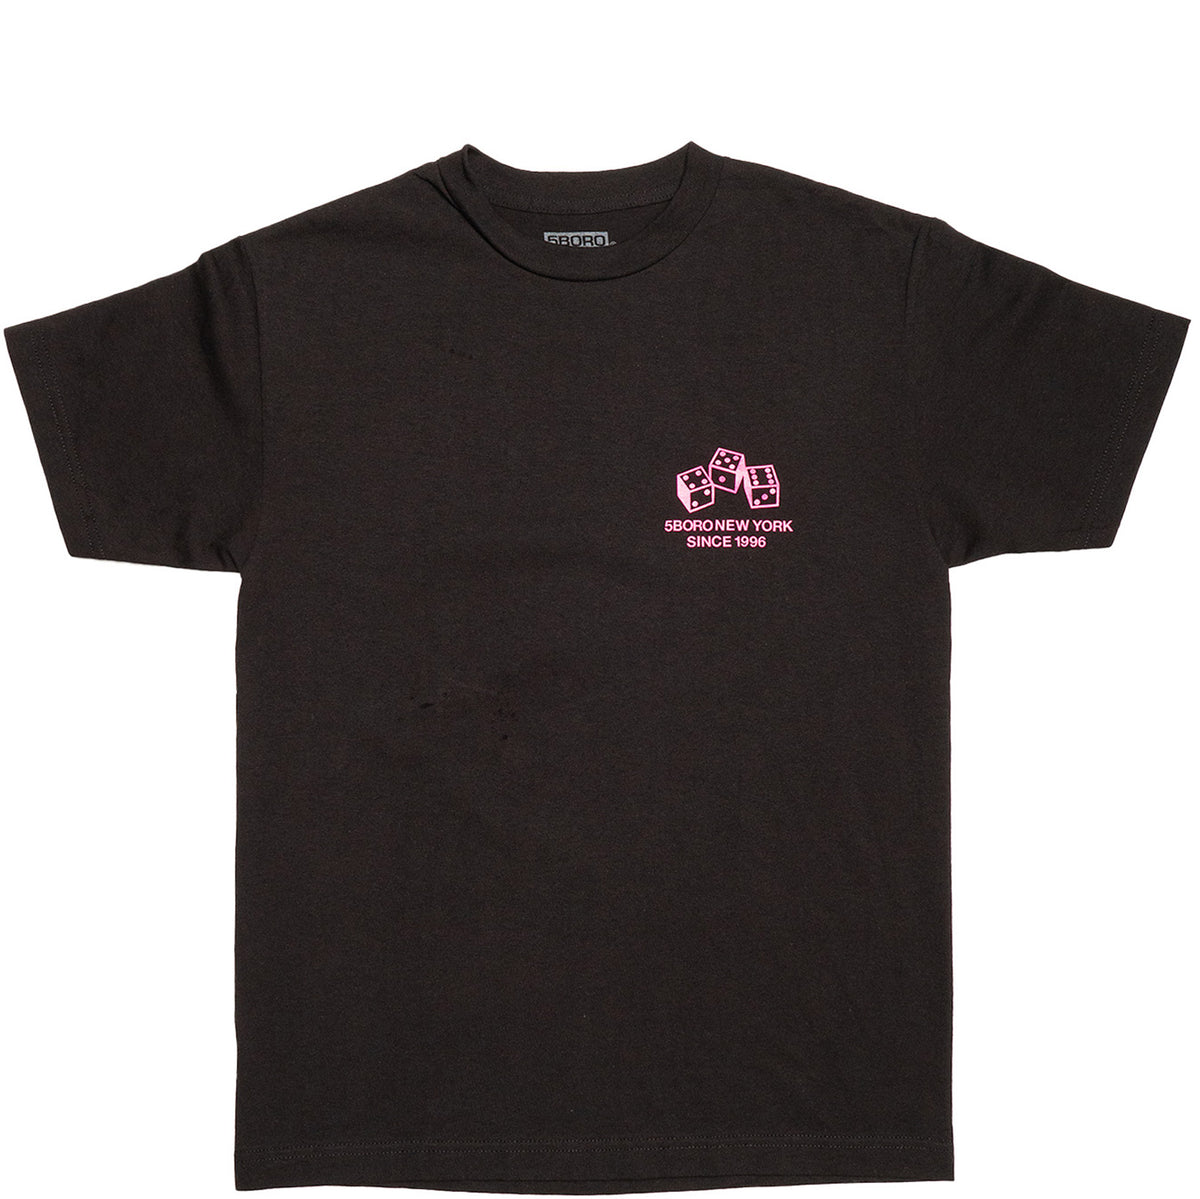 5boro 4-5-6 dice  short sleeve black tee with pink graphic